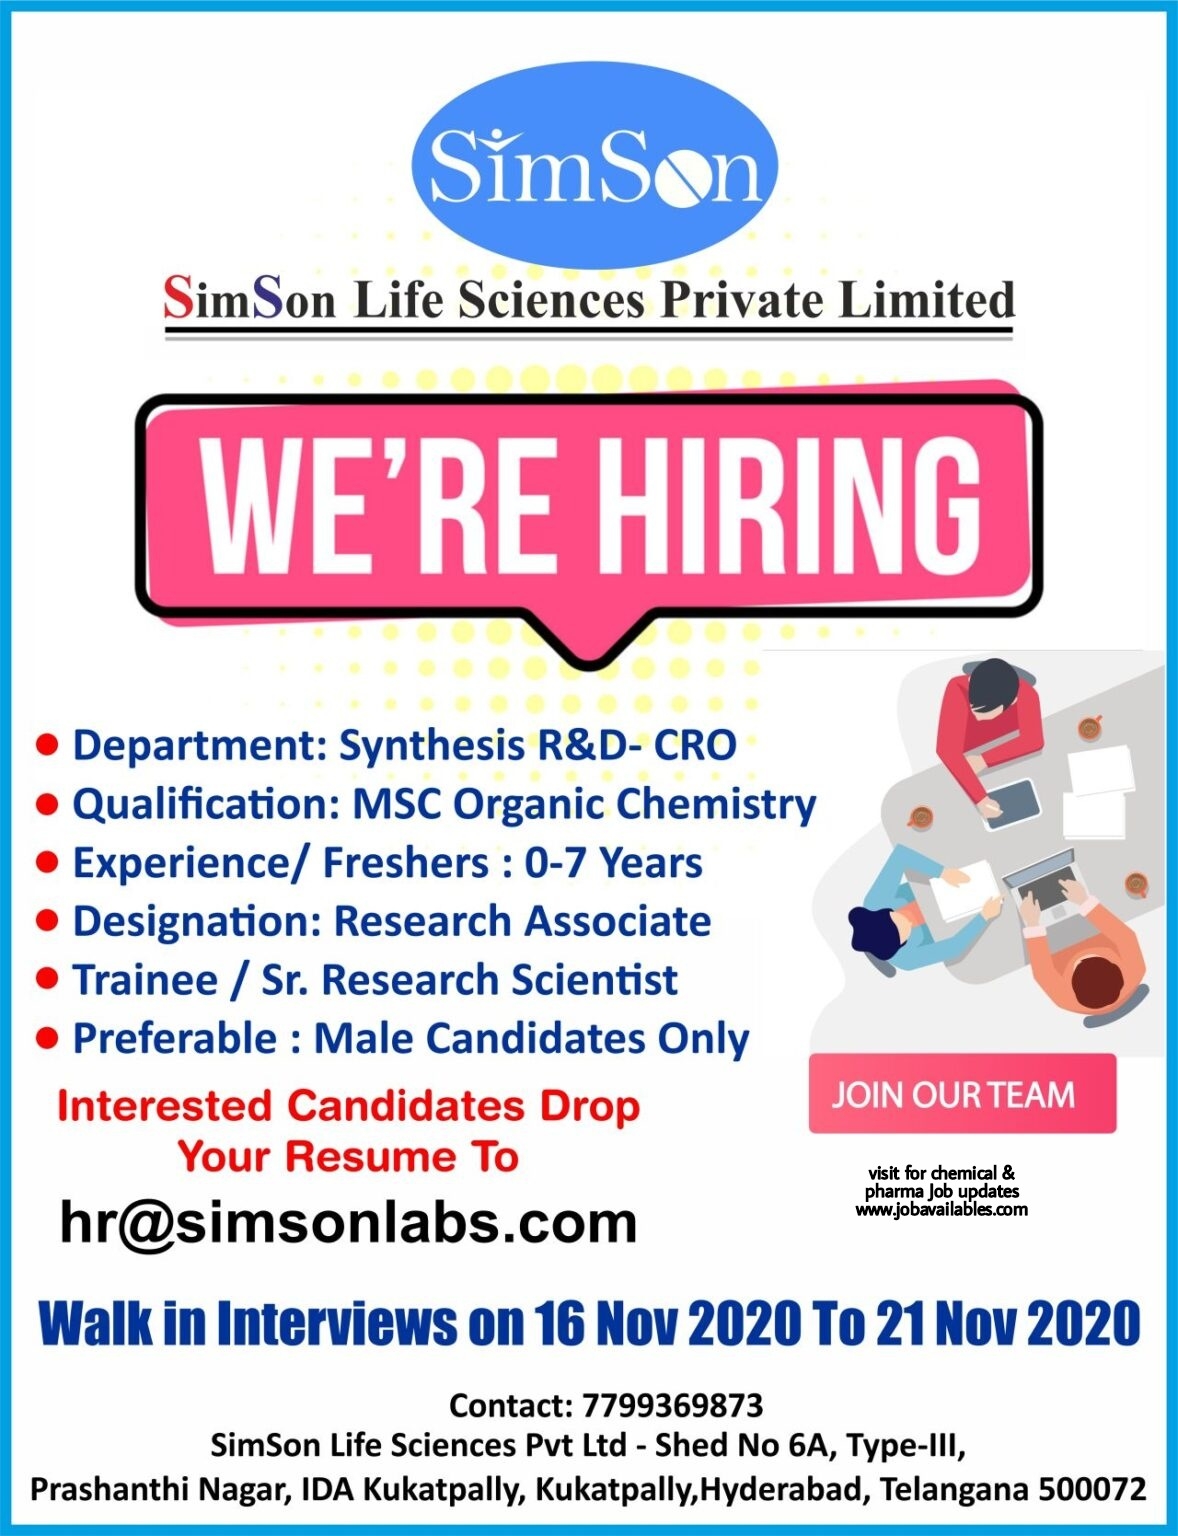 Job Availables, SimSon Life Sciences Pvt Ltd Interview For Freshers Msc Organic Chemistry - R&D Synthesis